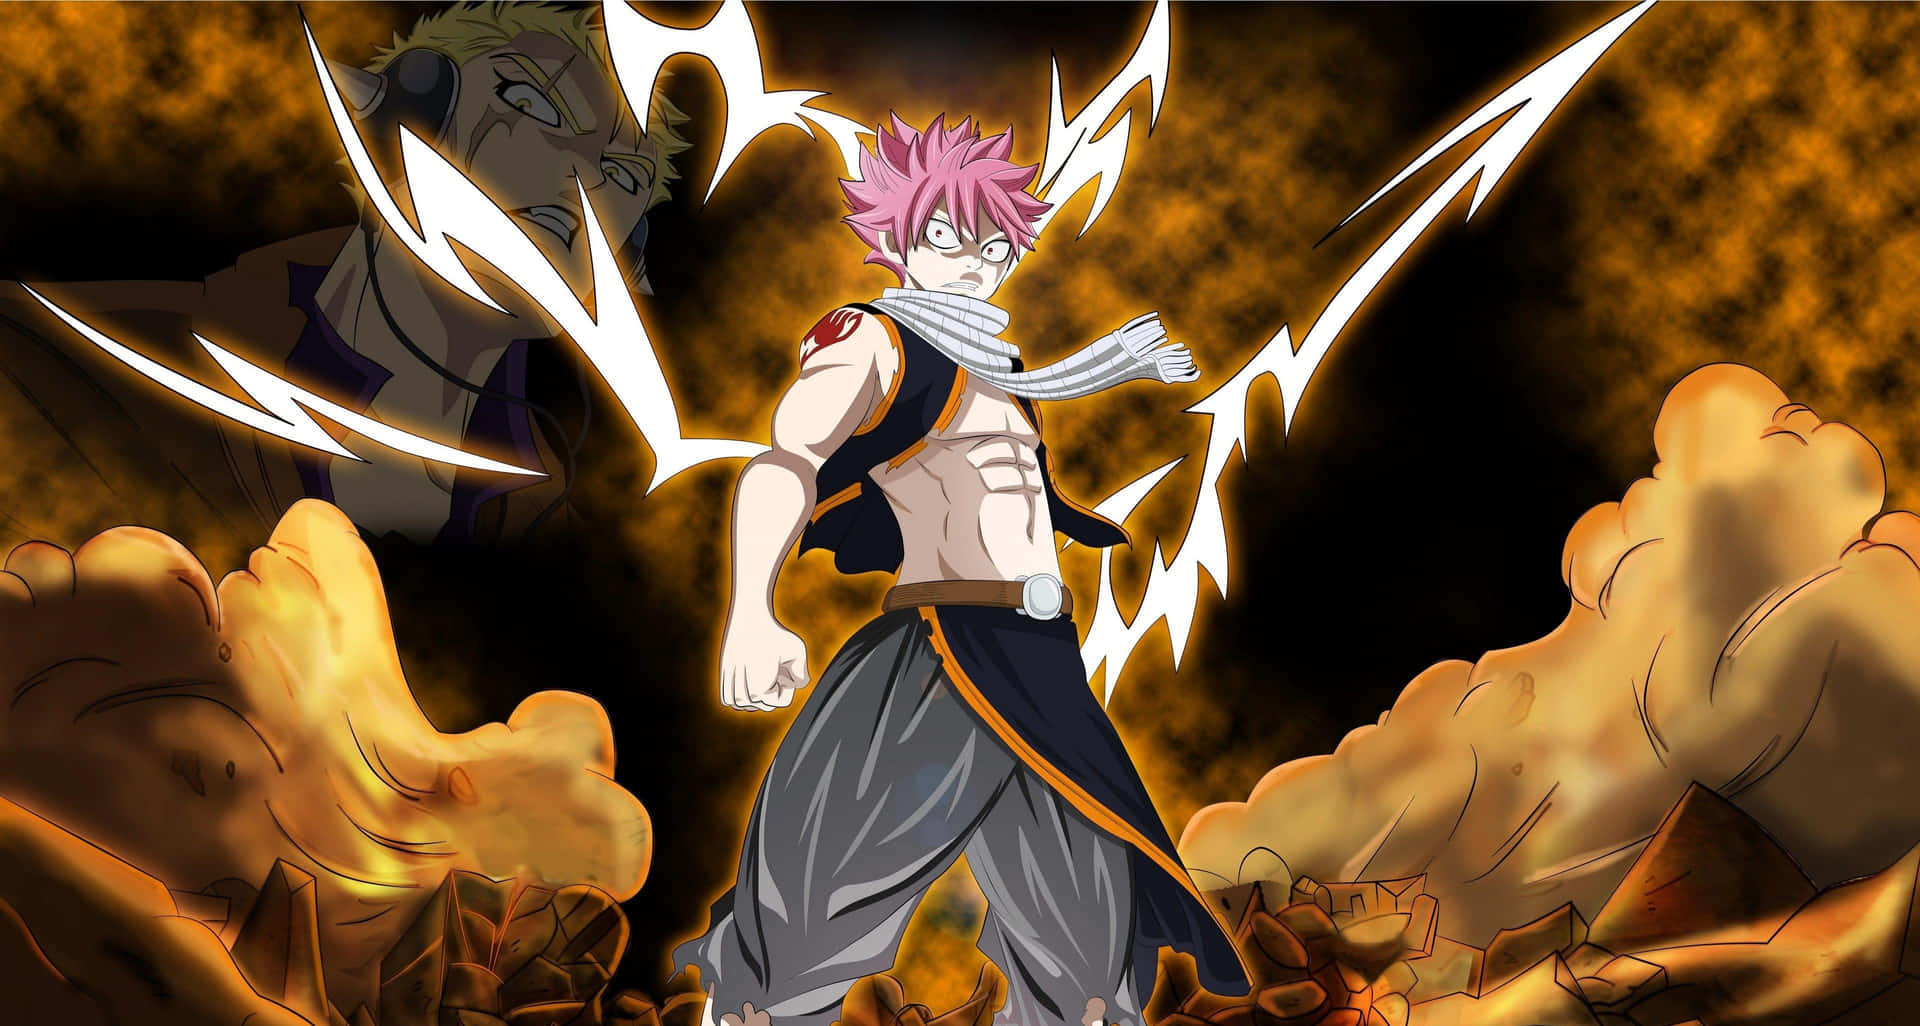 Natsu Dragneel Posing With Clenched Fists In Front Of A Fiery Background